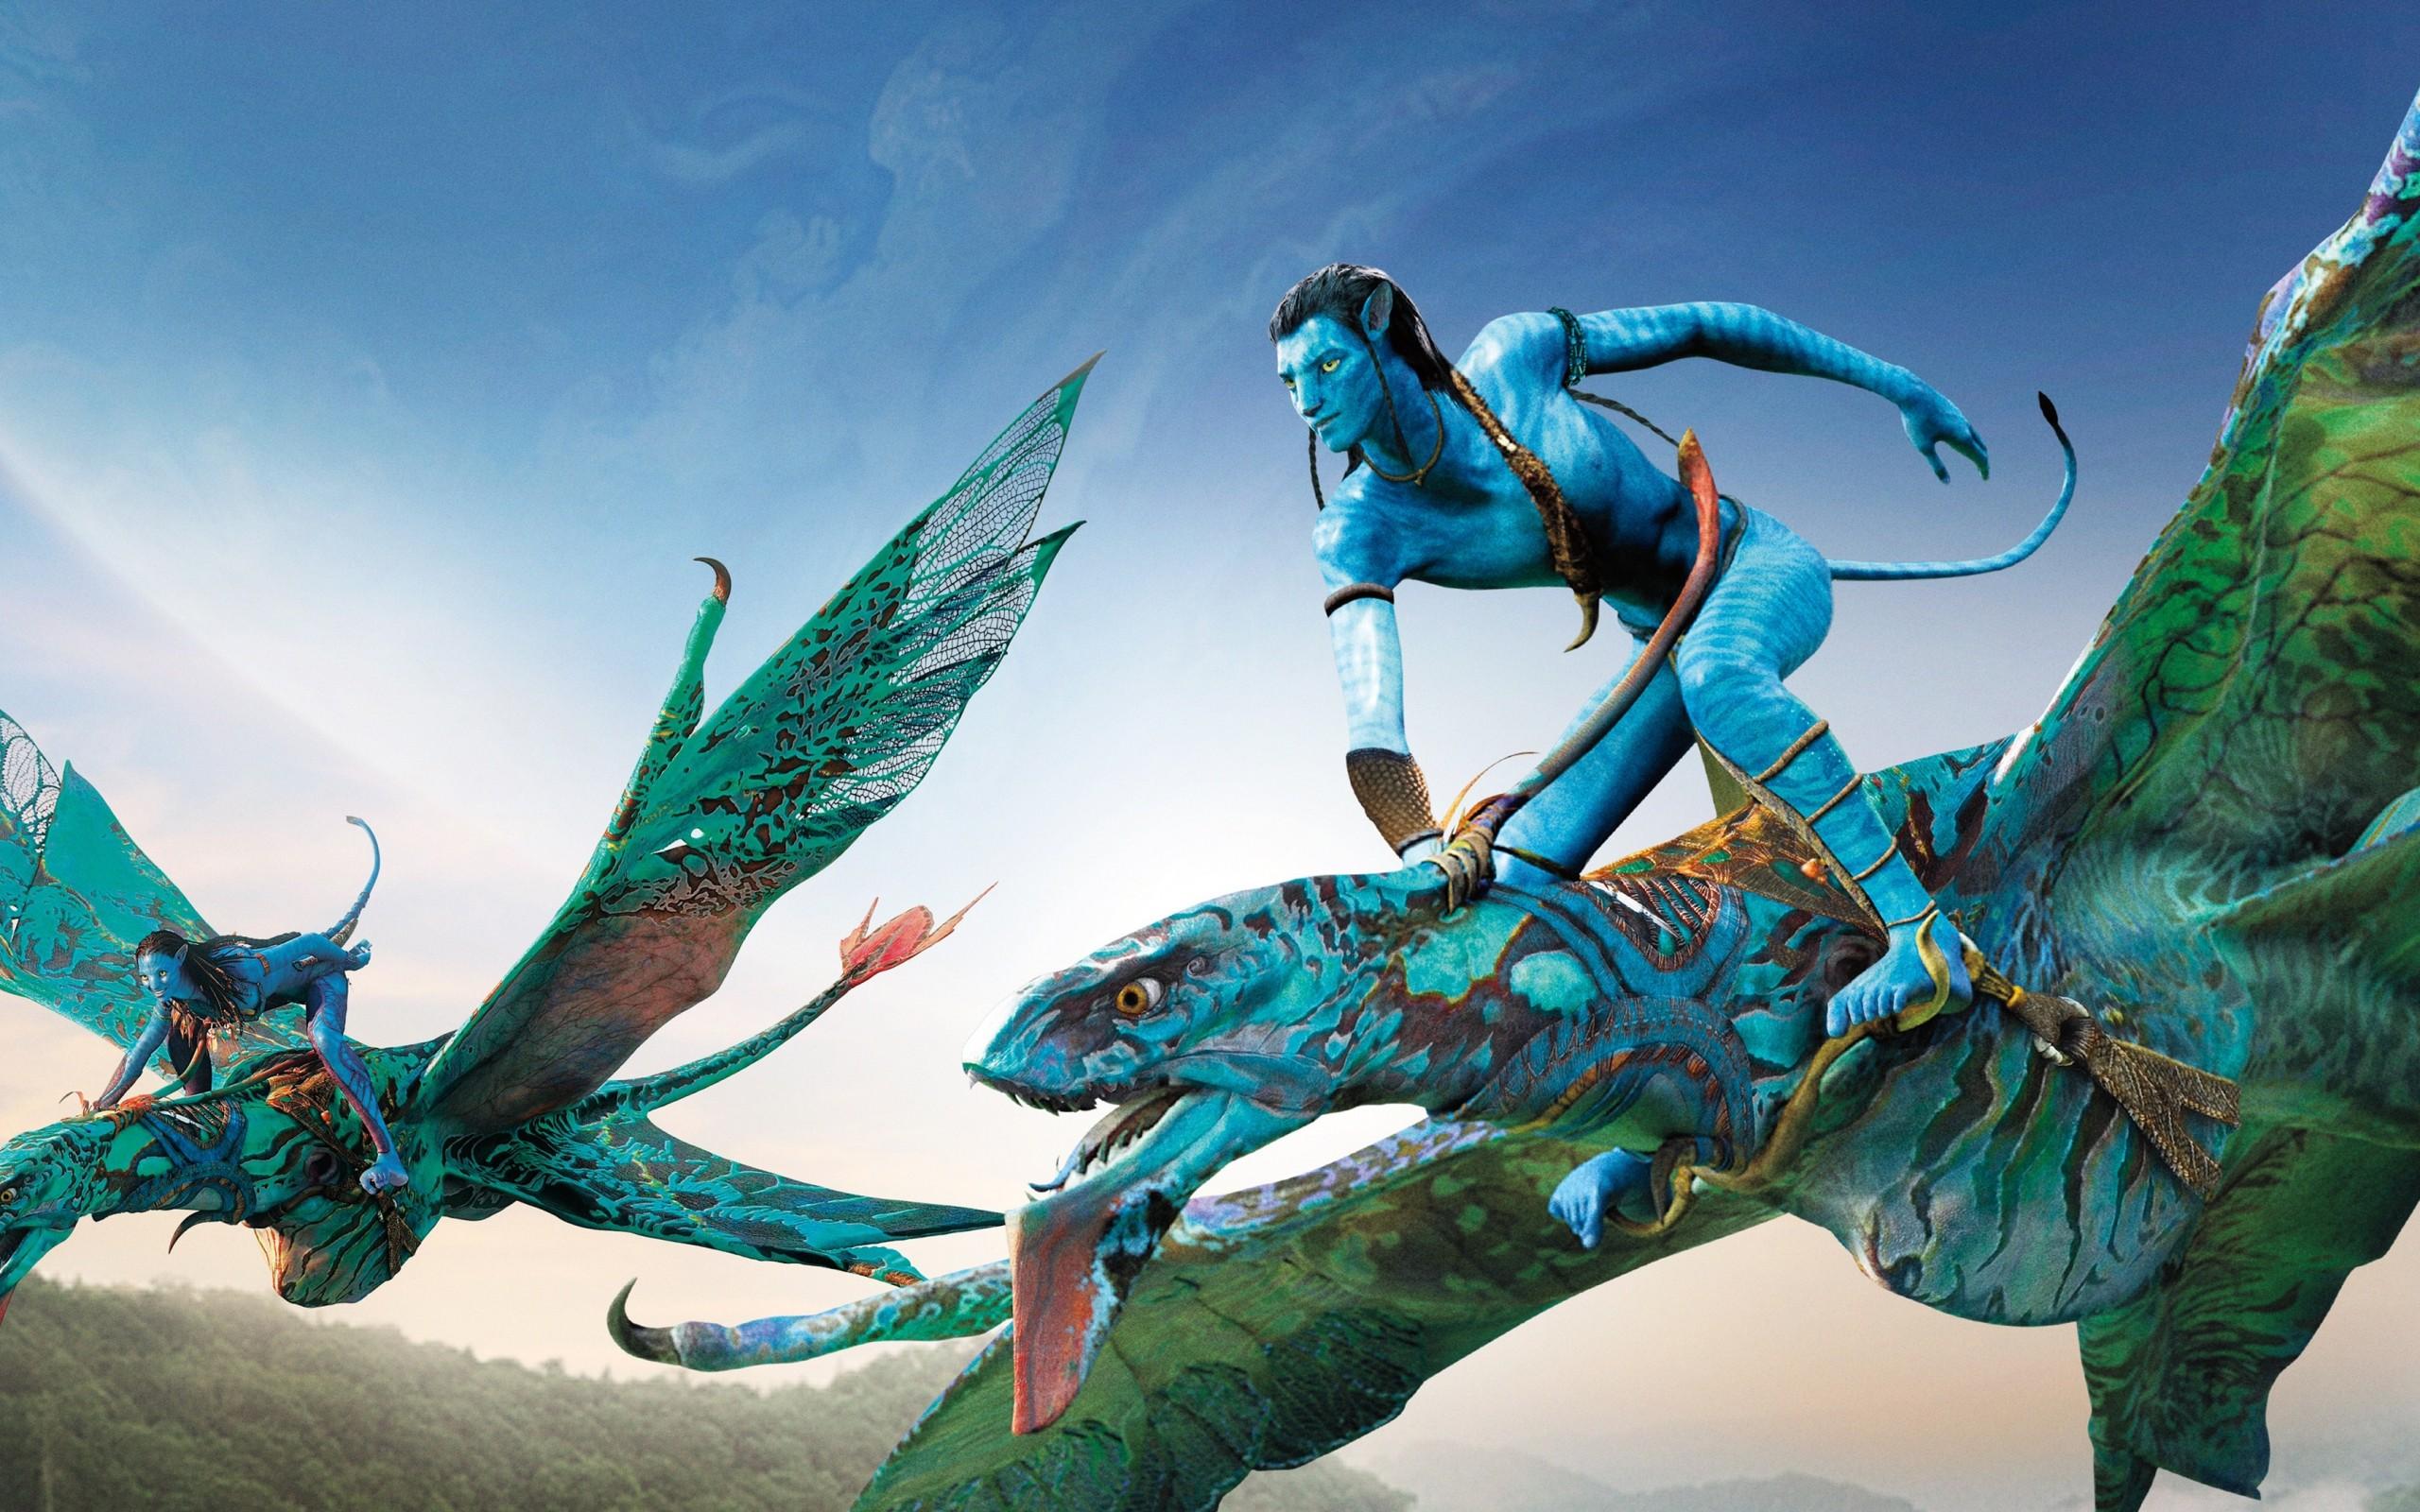 Avatar 2 4K UHD preorder on June 23 and technical info update